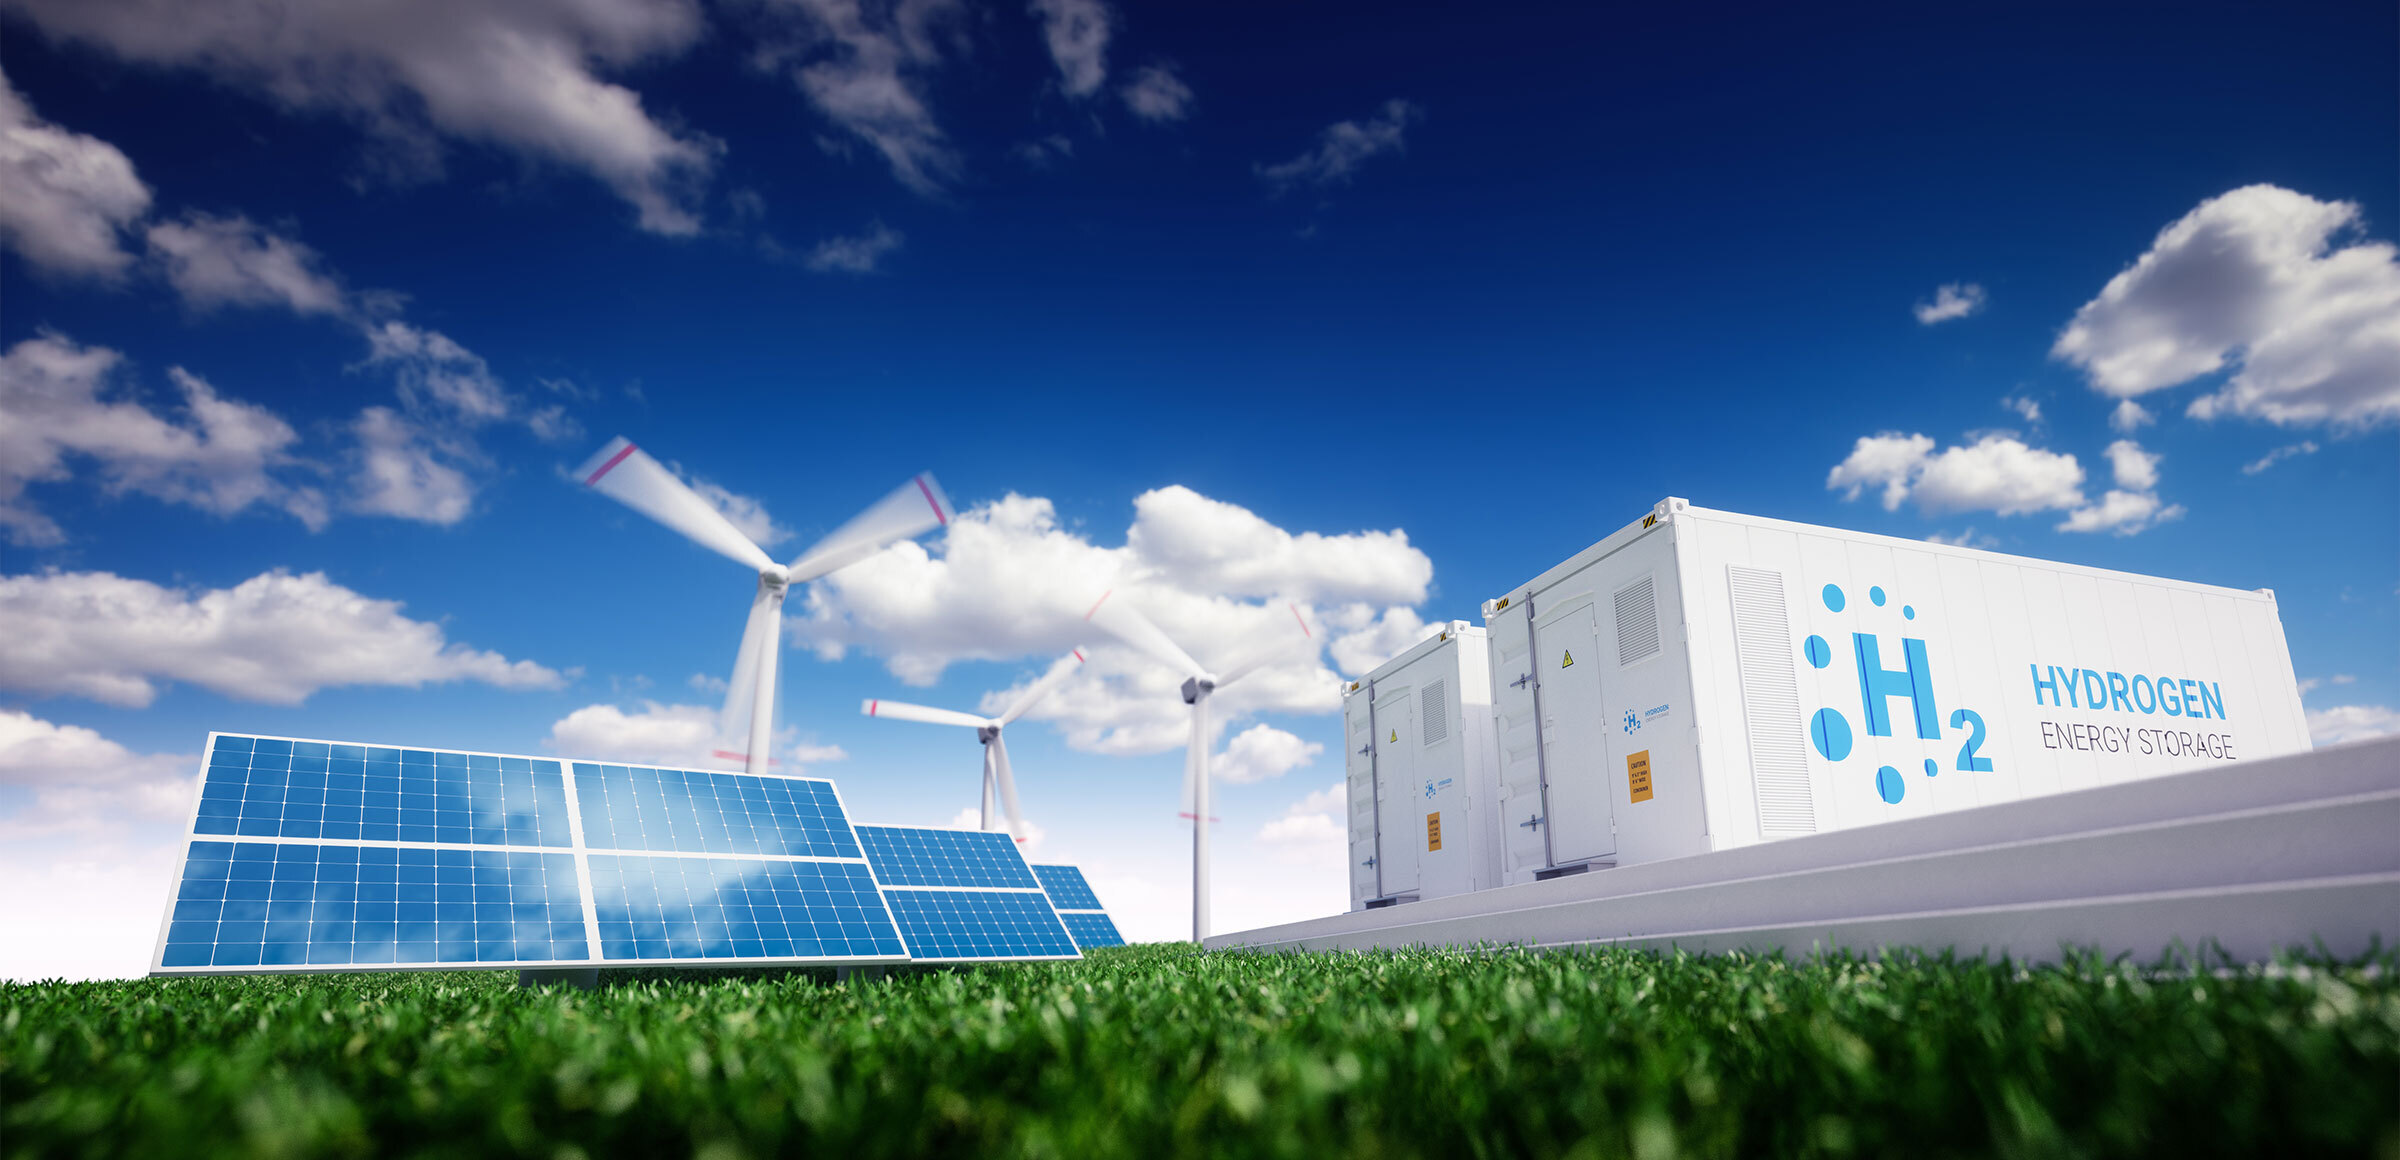 Green Hydrogen, the future of renewables